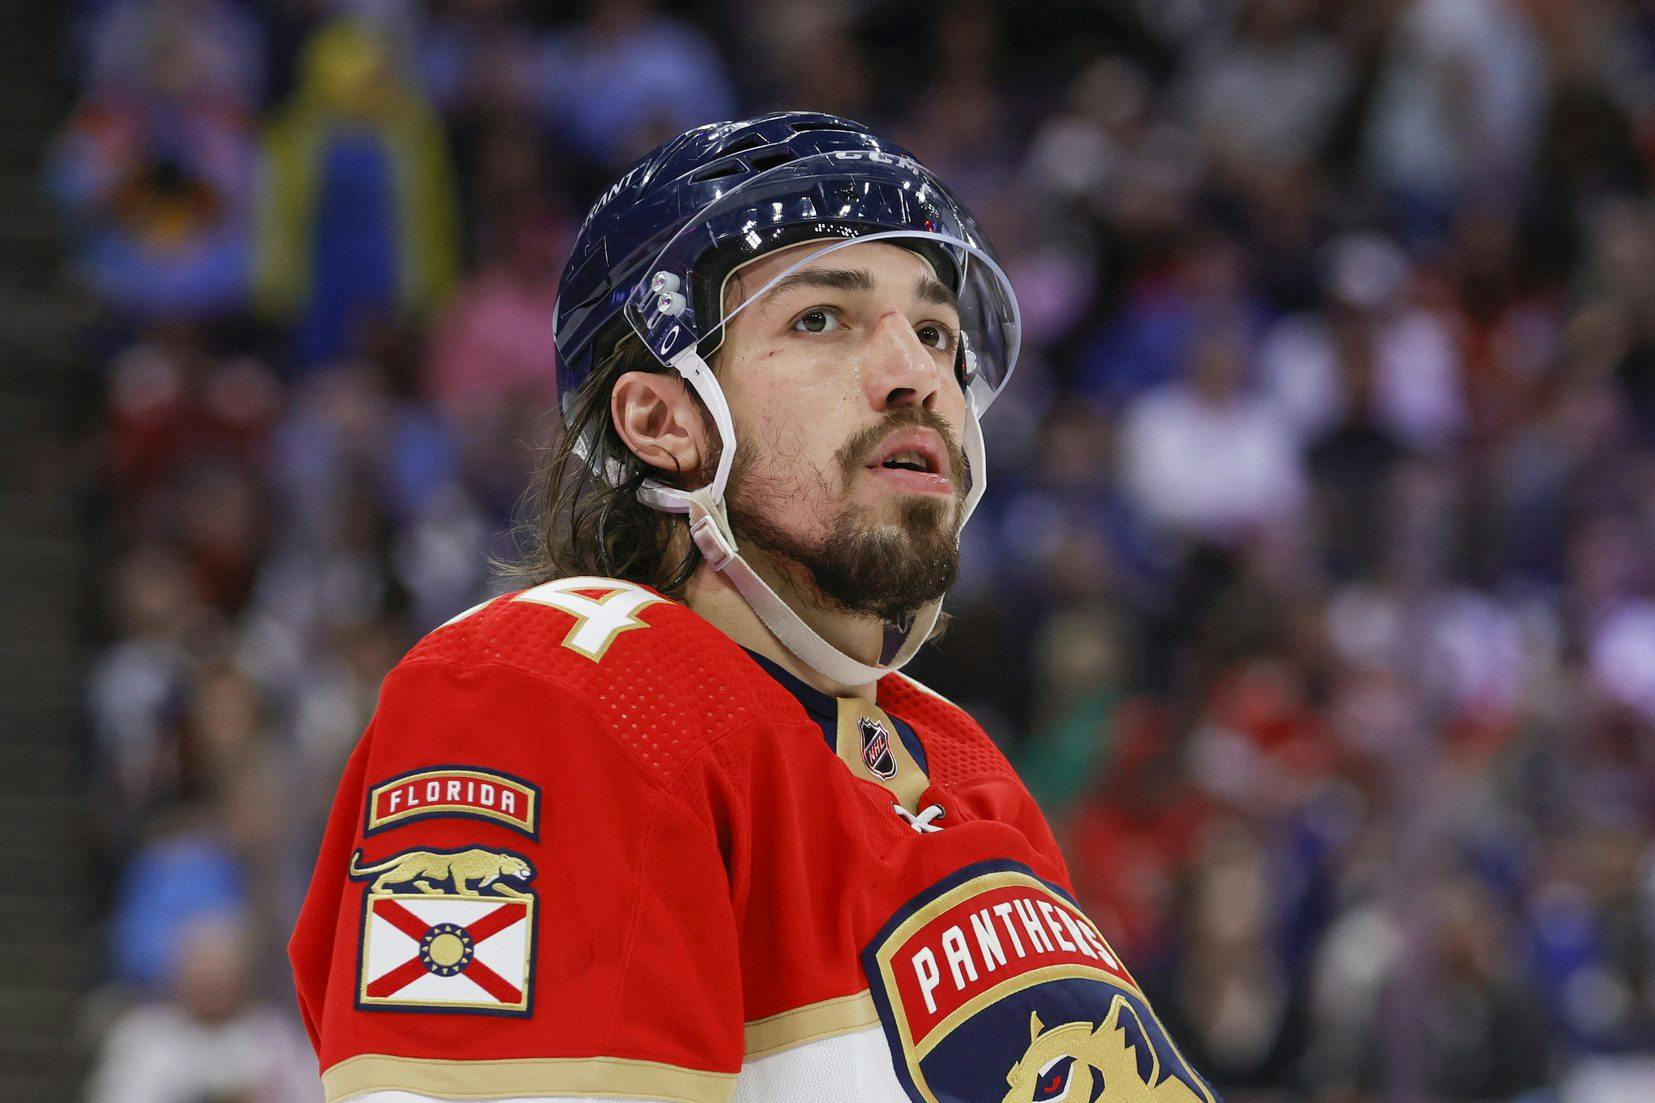 Florida Panthers’ Ryan Lomberg out for rest of series against Boston Bruins with upper-body injury